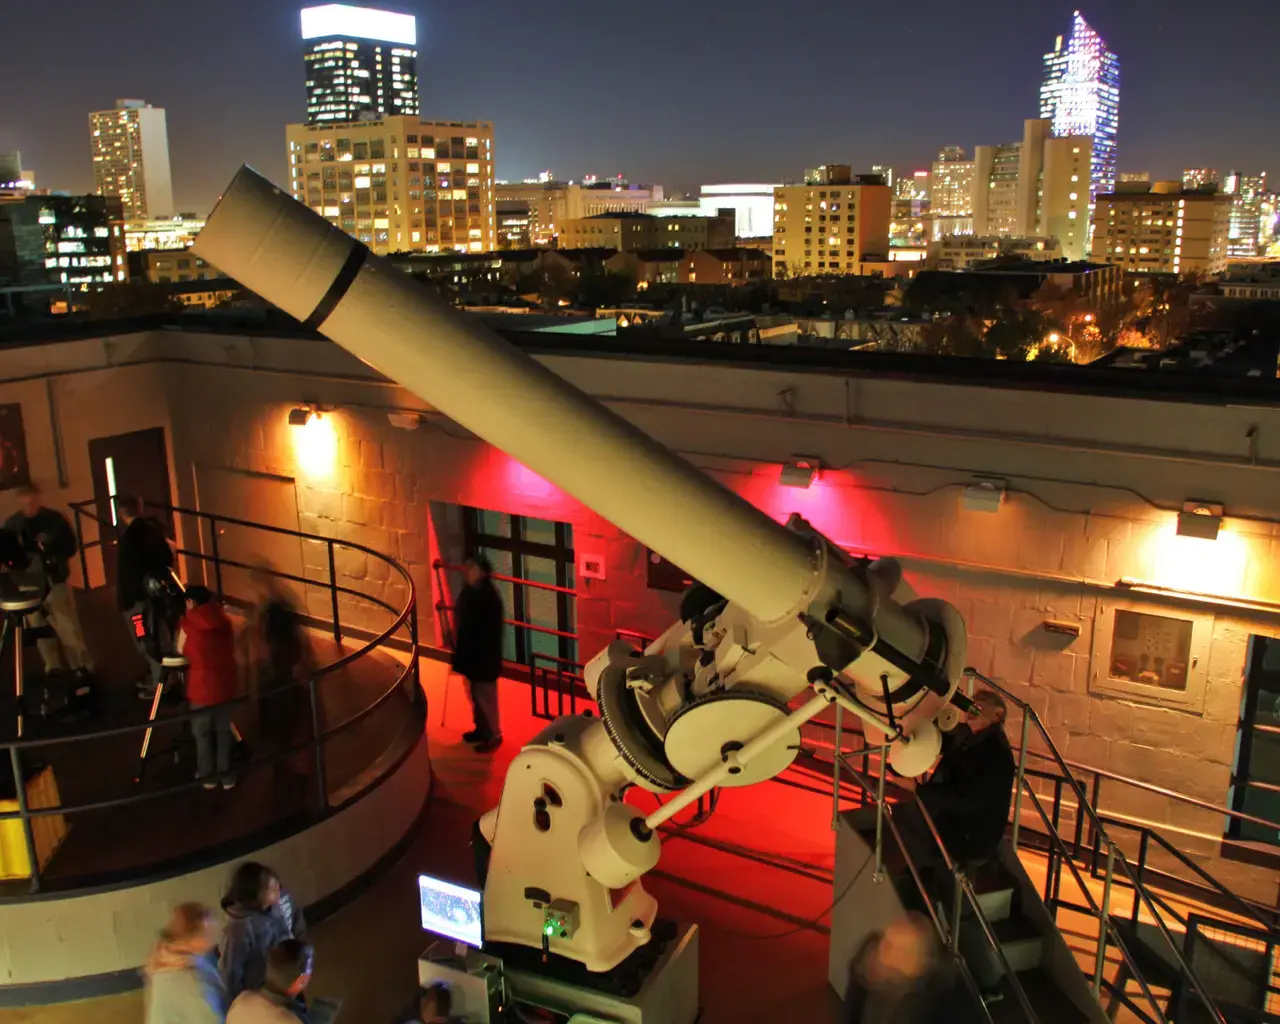 Nighttime stargazing from the Joel N. Bloom Observatory at The Franklin Institute. Courtesy of The Franklin Institute.